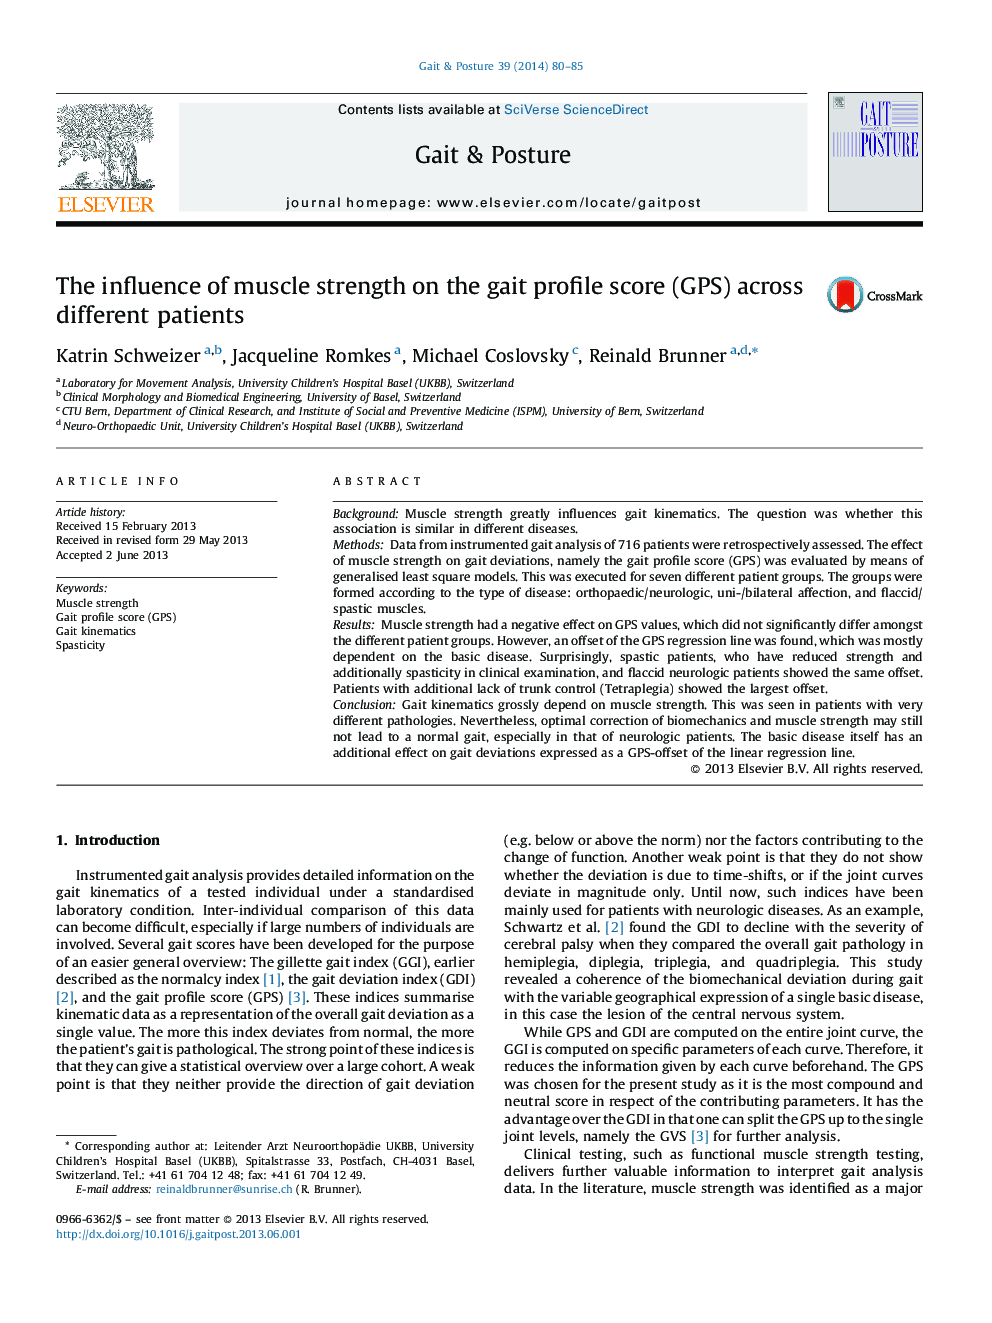 The influence of muscle strength on the gait profile score (GPS) across different patients